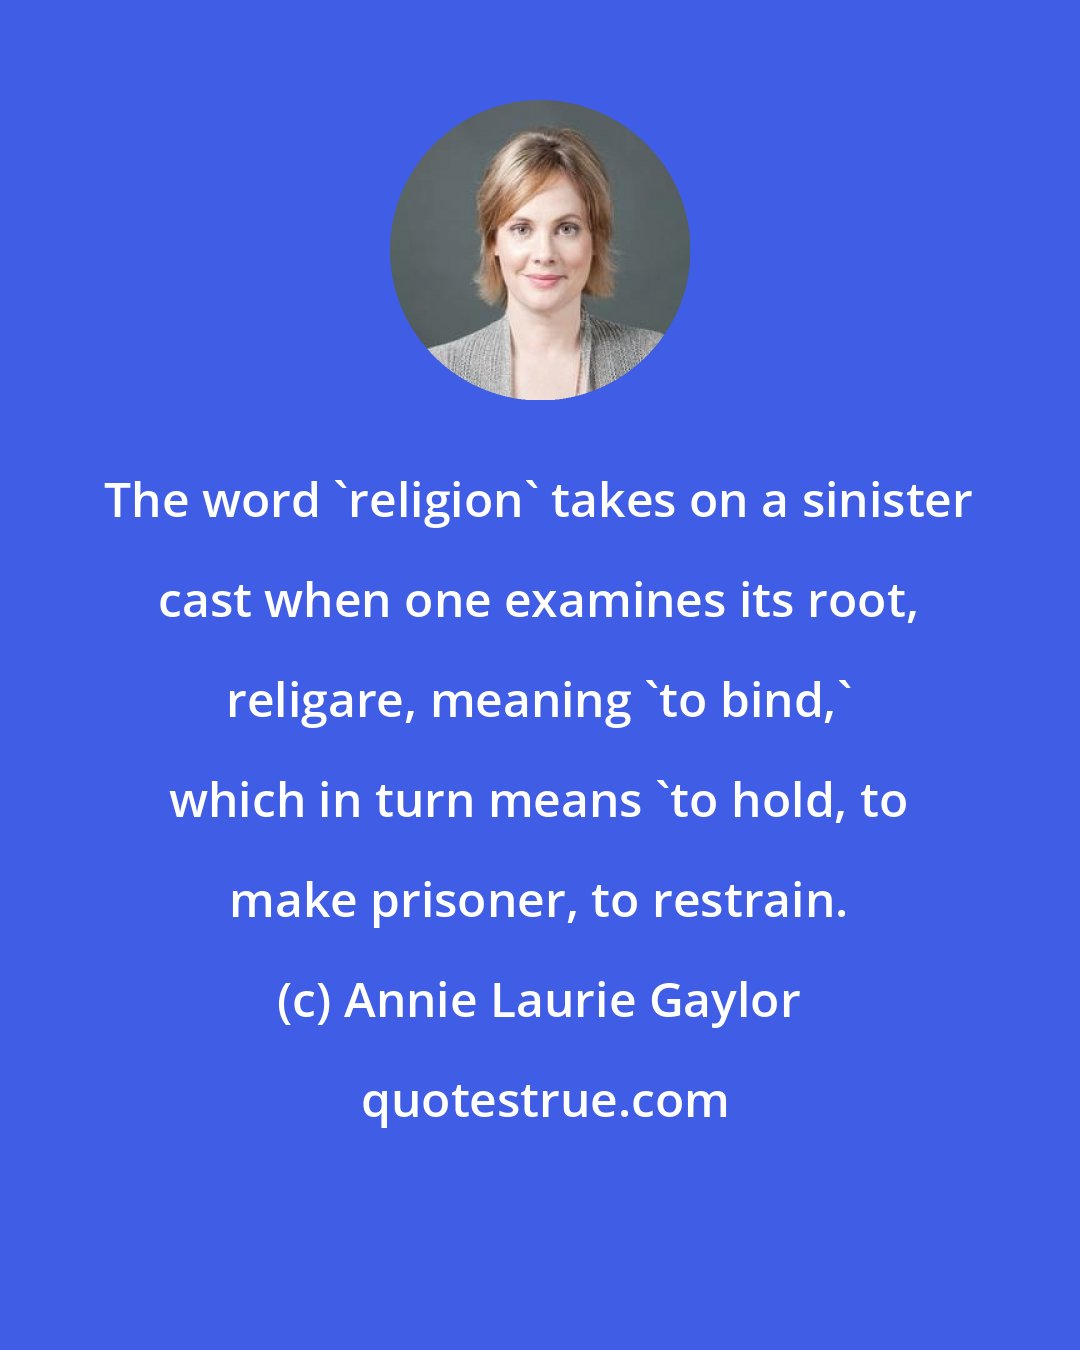 Annie Laurie Gaylor: The word 'religion' takes on a sinister cast when one examines its root, religare, meaning 'to bind,' which in turn means 'to hold, to make prisoner, to restrain.